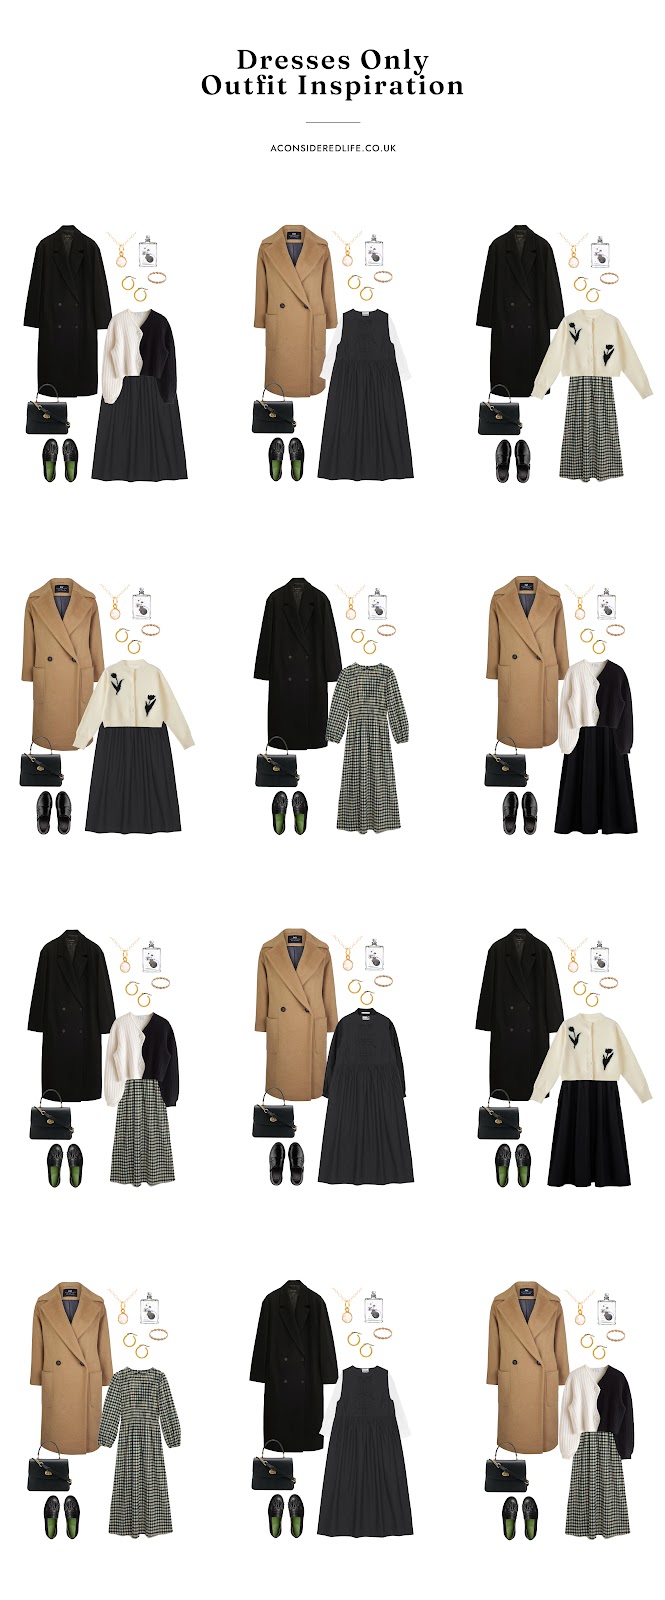 A Dresses Only Capsule Wardrobe